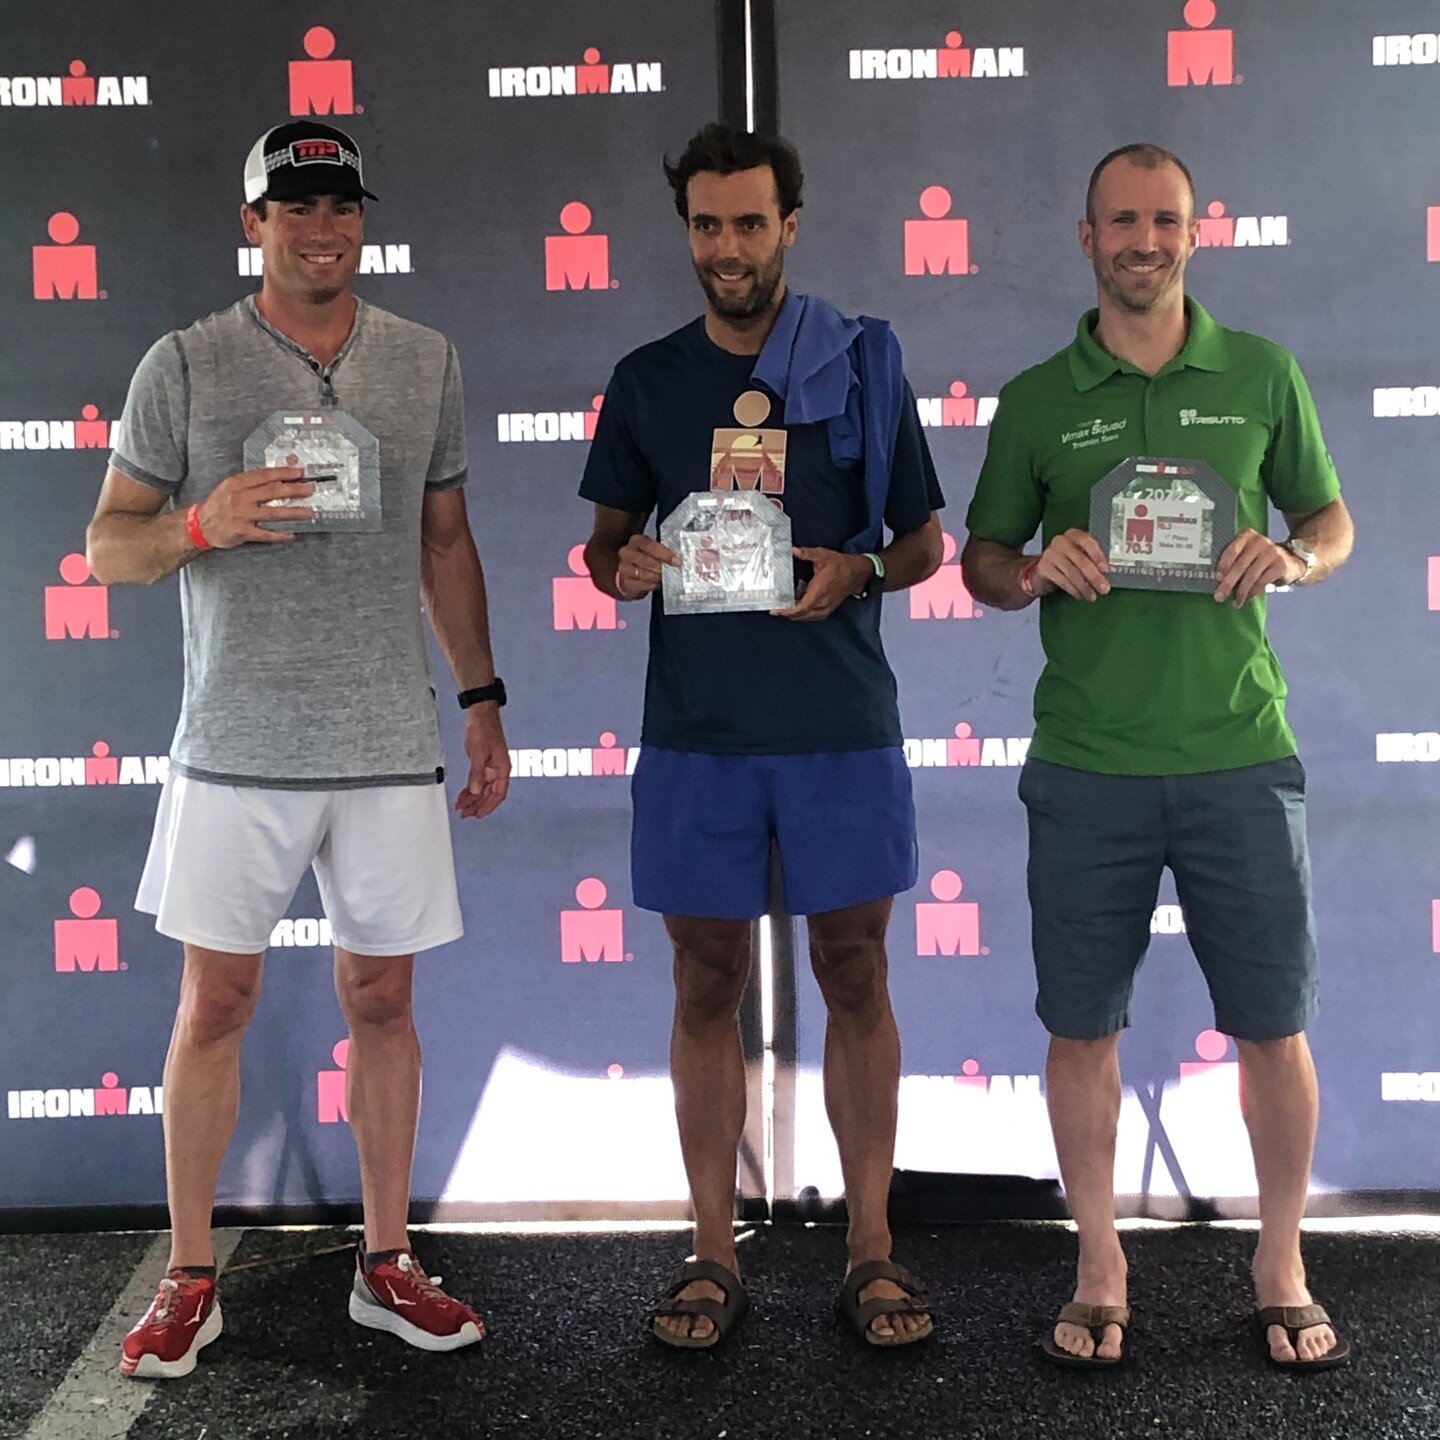 Vmax Squad Medals Monday - Huge congrats to Vmax athletes: 

Scott Bradley @sbradley11 for taking 1st AG, placing 2nd AG overall, clocking the fastest bike split overall (besting the top MPro) and setting a new course PB at 70.3 Eagleman. 

Todd Hawk